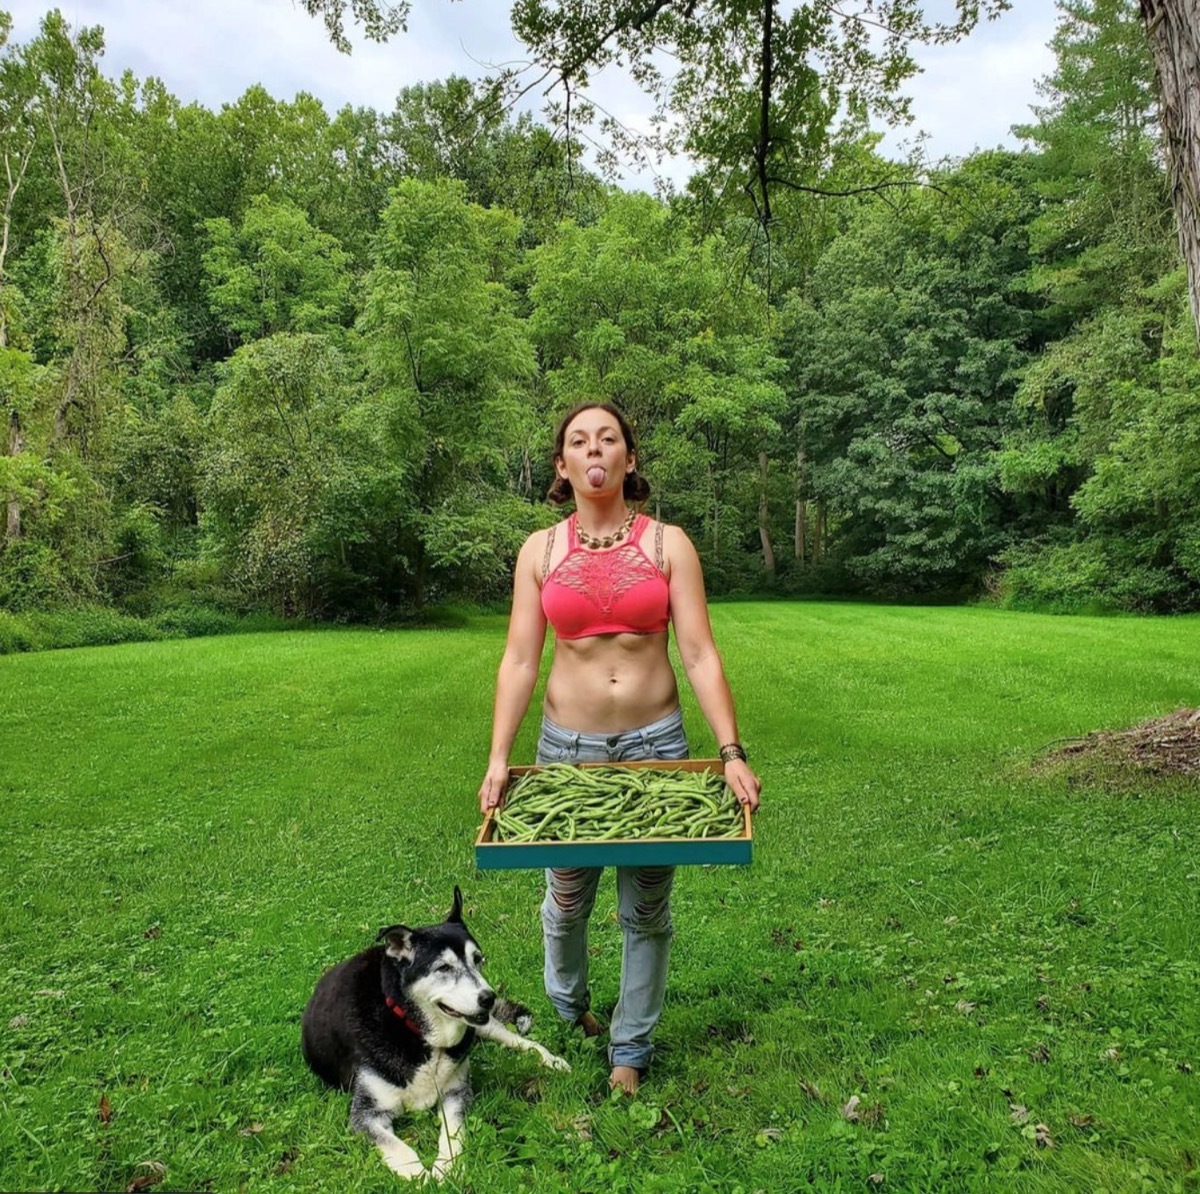 Mackenzie Rosman wearing jeans and a red crop top in a green field carrying a tray of vegetables and standing next to a black and white dog